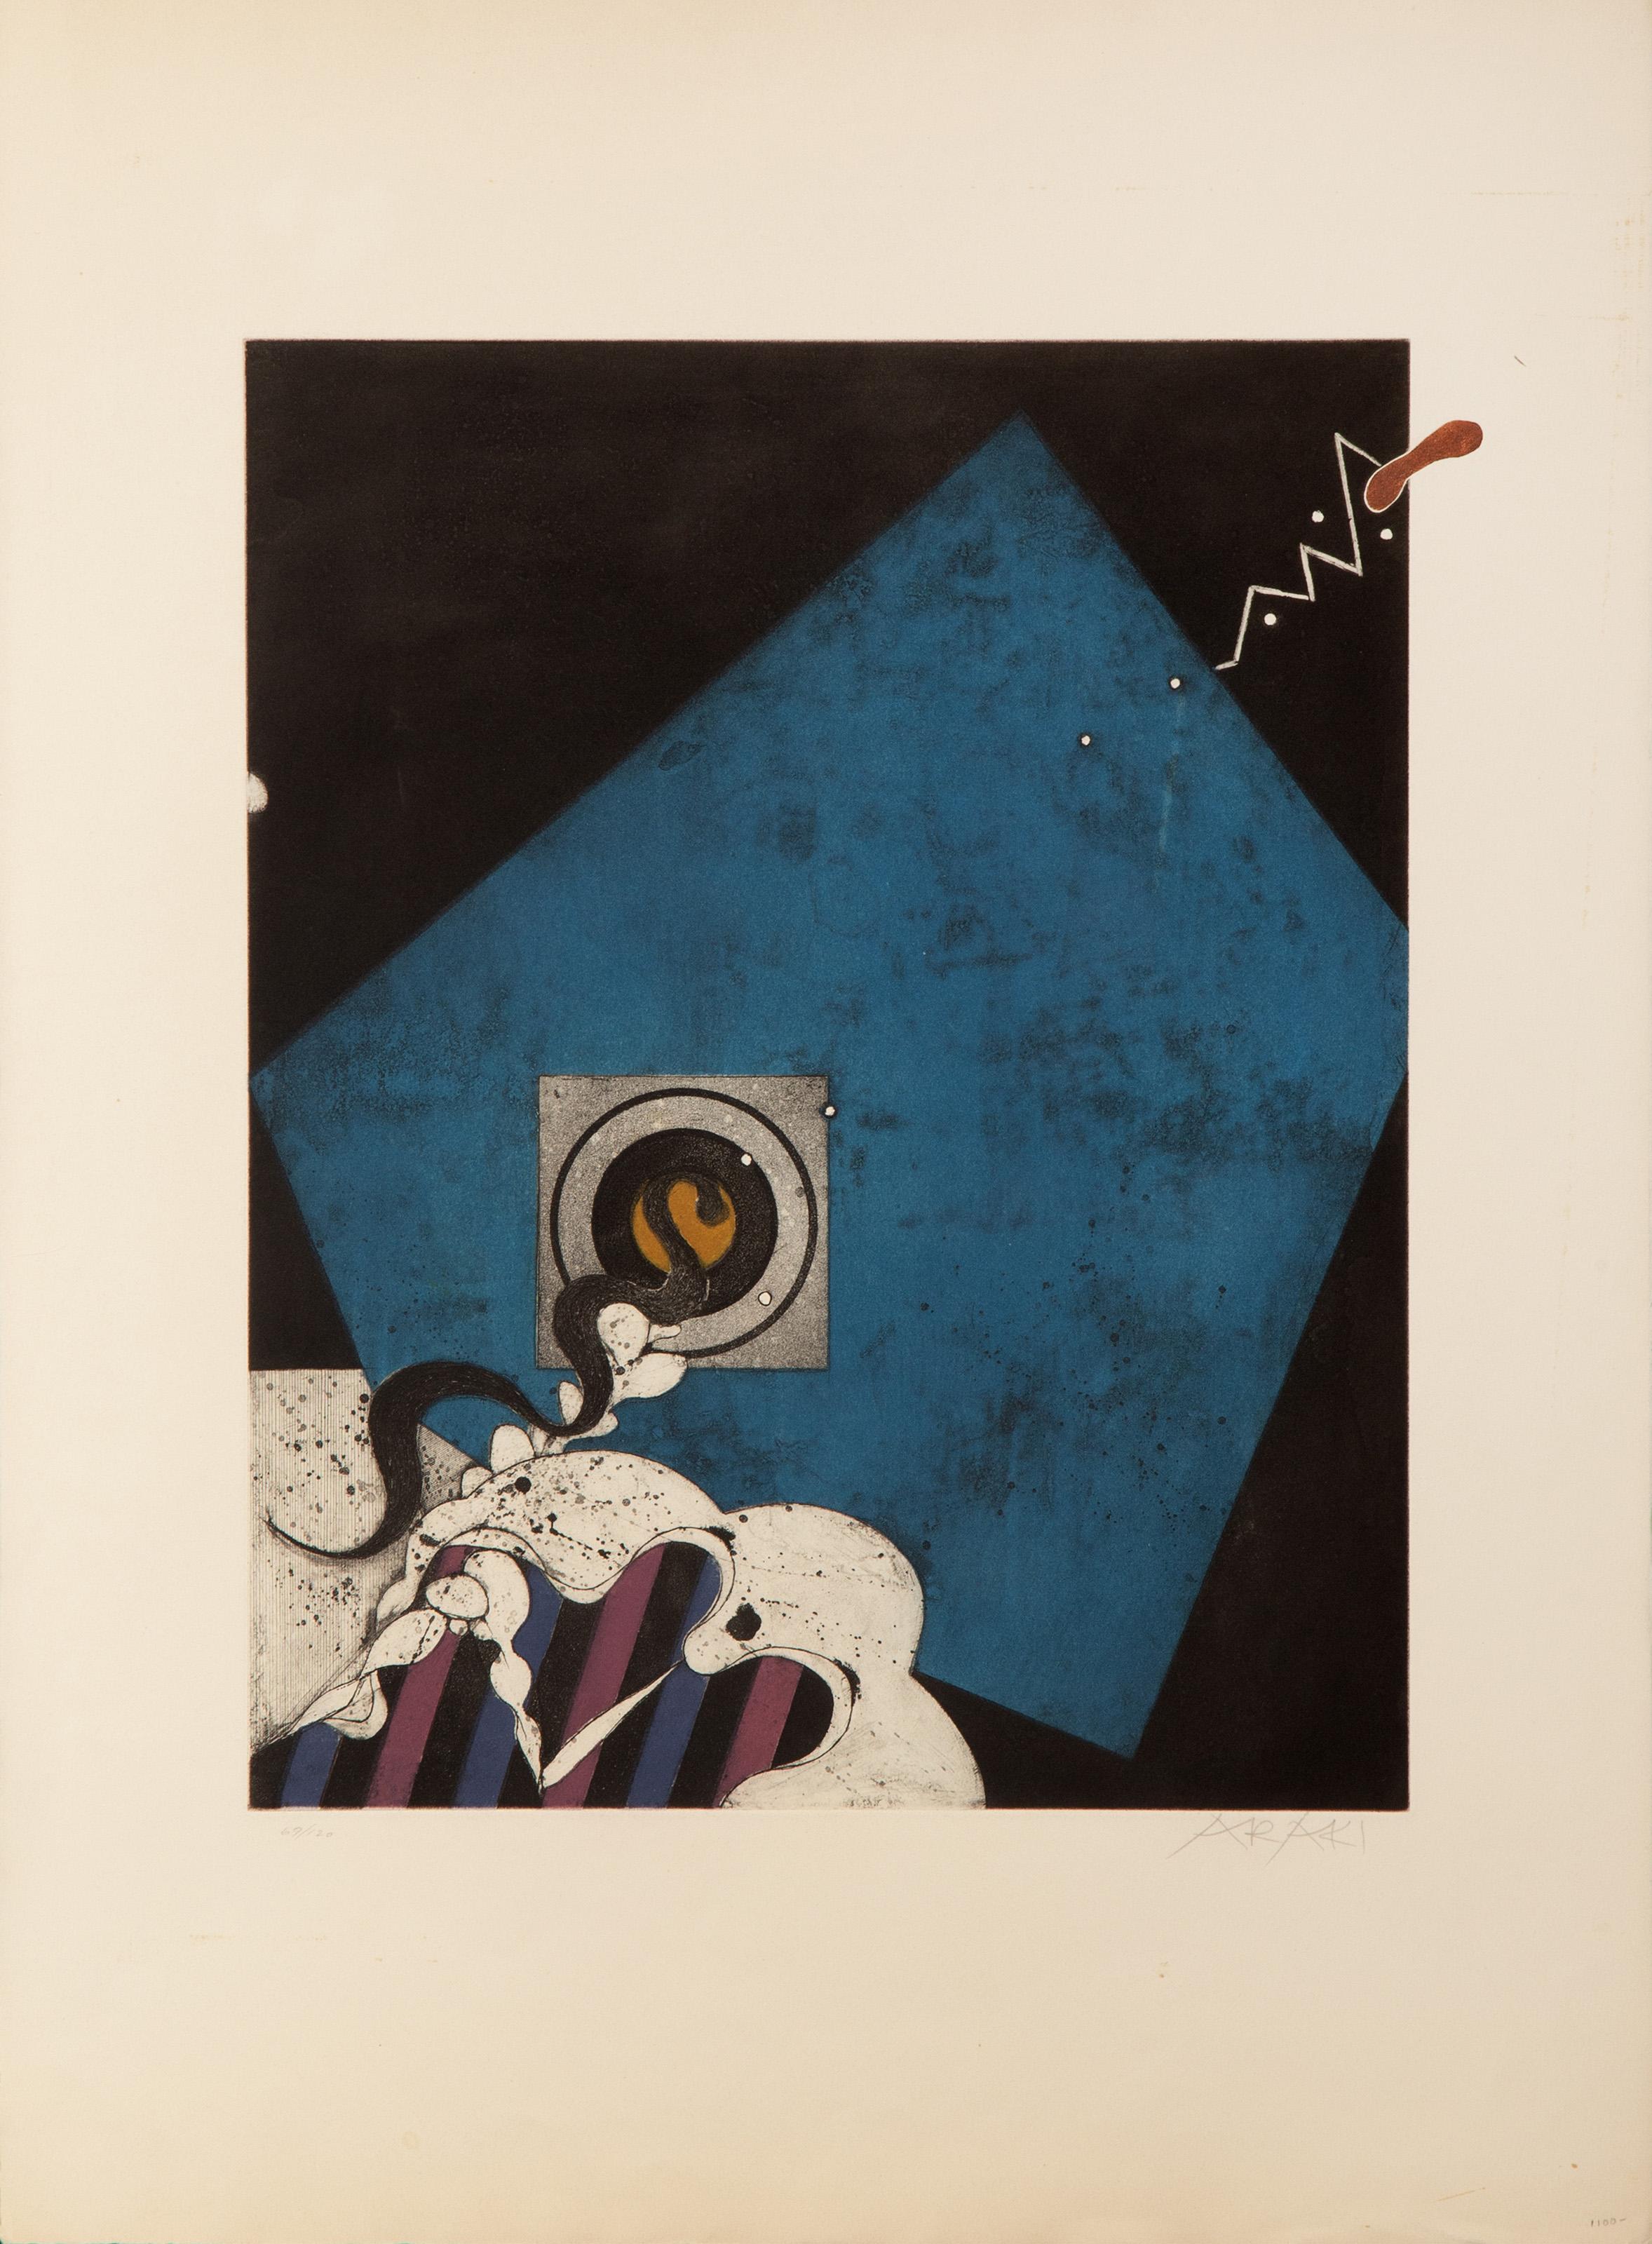 Blue Square
Tetsuo Araki, Japanese (1937–1984)
Date: circa 1970
Etching with Aquatint, signed and numbered in pencil
Edition of 69/120
Image Size: 19.5 x 15.5 inches
Size: 30 x 22 in. (76.2 x 55.88 cm)